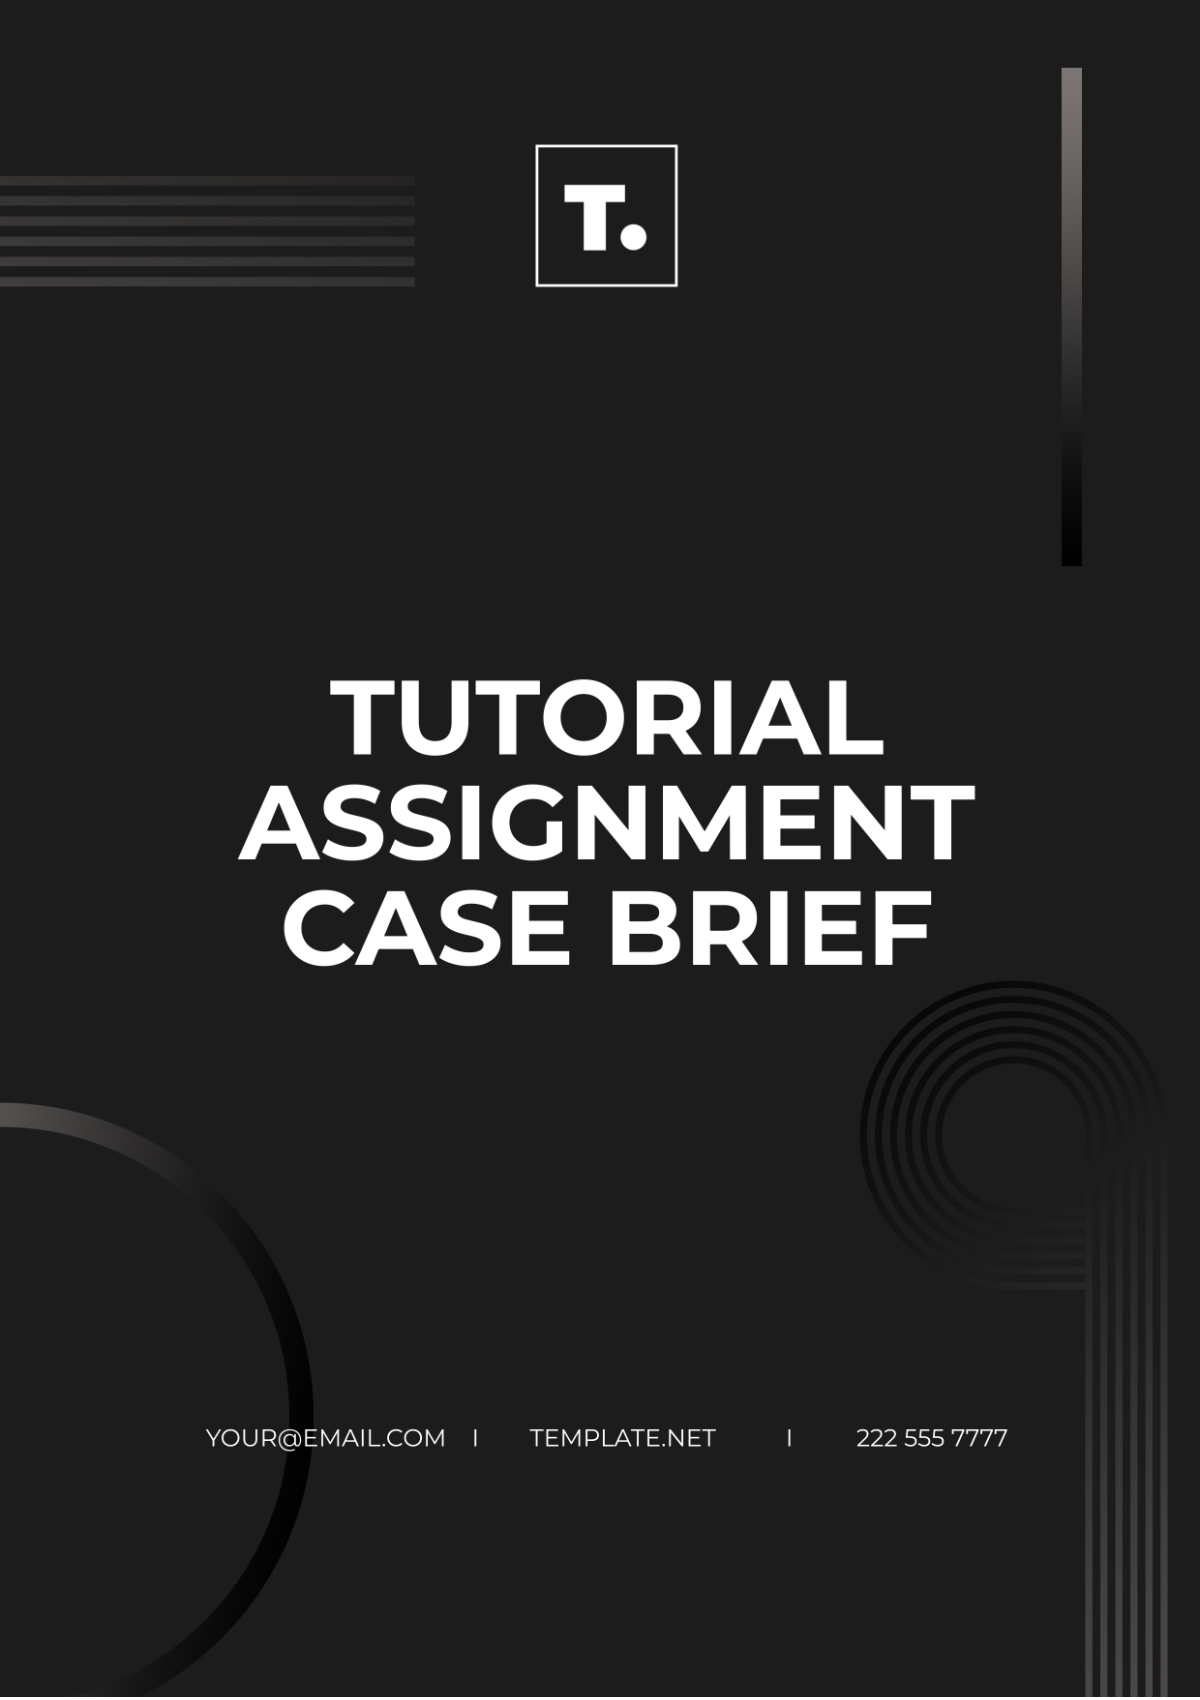 Free Tutorial Assignment Case Brief Template